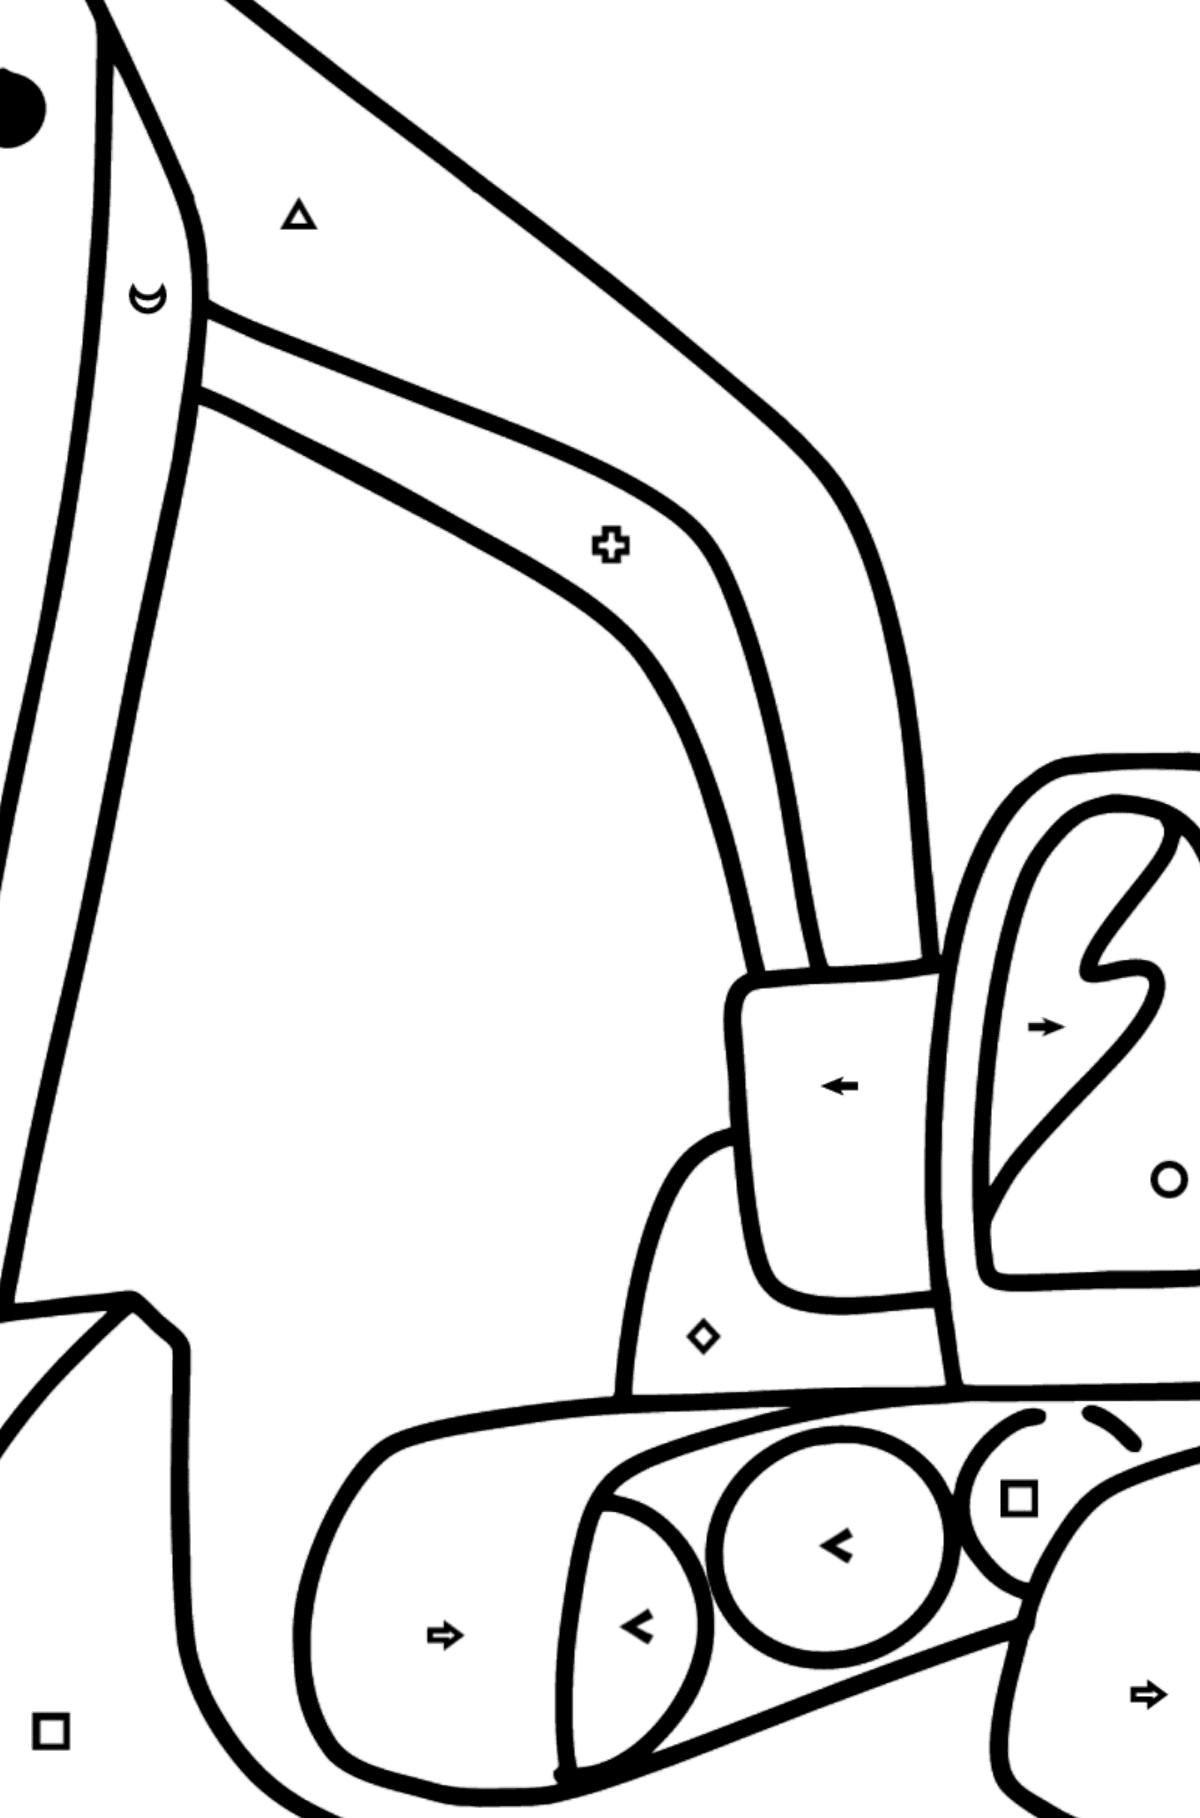 Tractor Excavator coloring page - Coloring by Symbols and Geometric Shapes for Kids